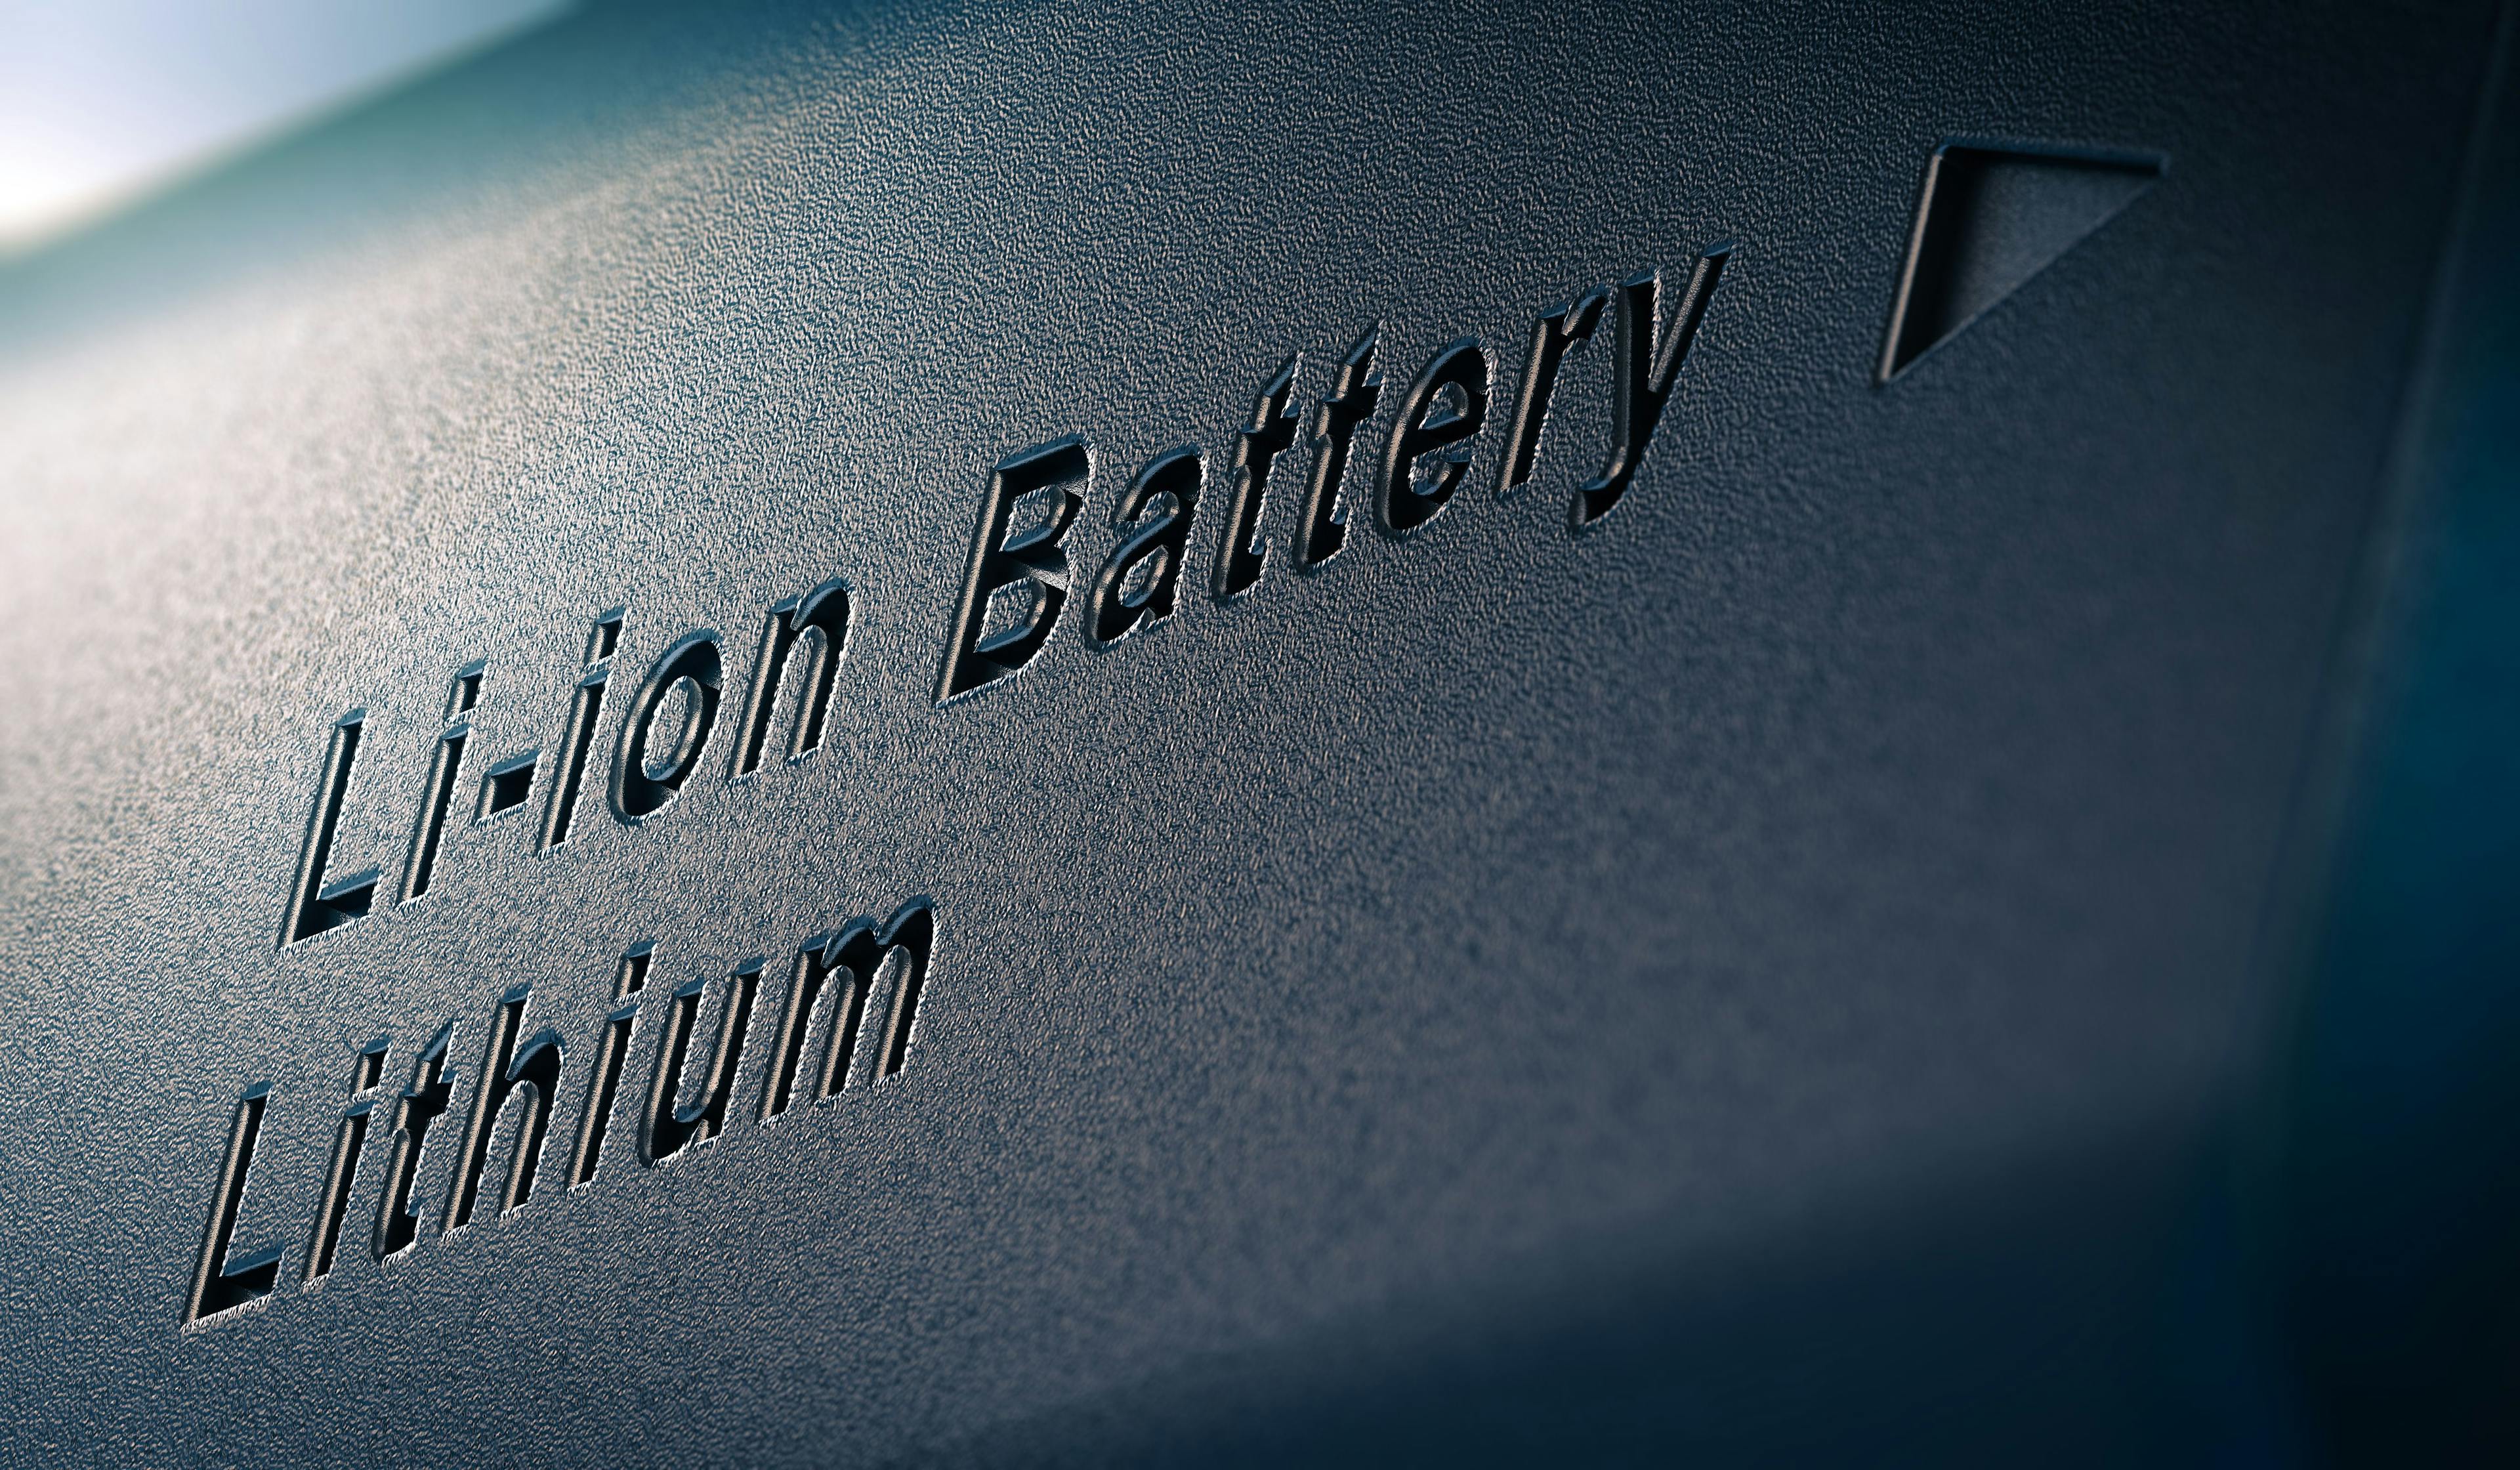 Li-ion Lithium Battery Pack Close Up | Image Credit: © Olivier Le Moal - stock.adobe.com